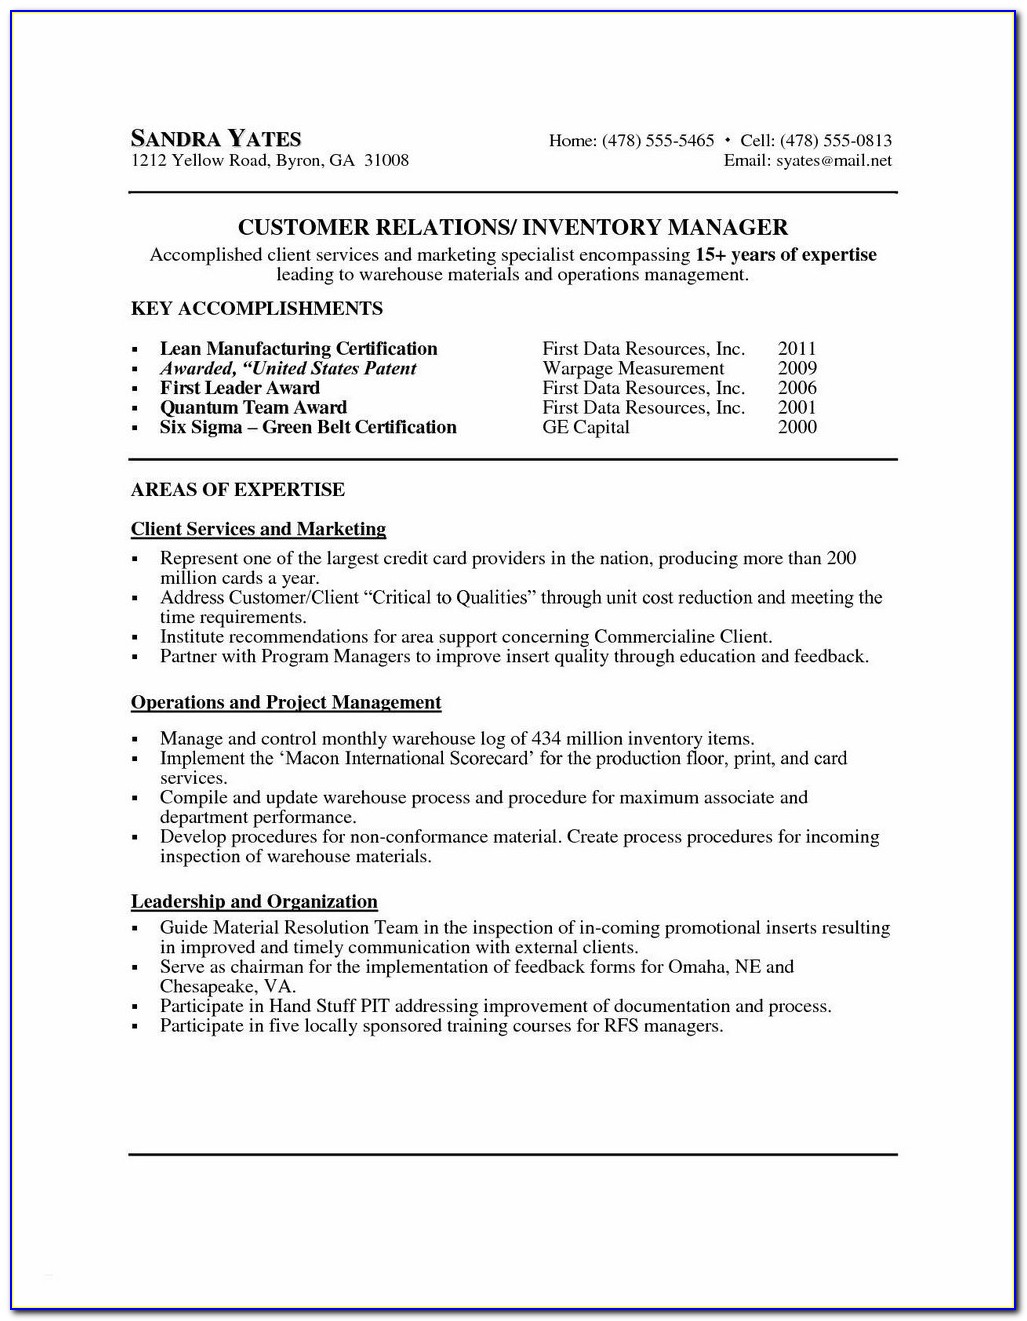 Professional Federal Resume Writers